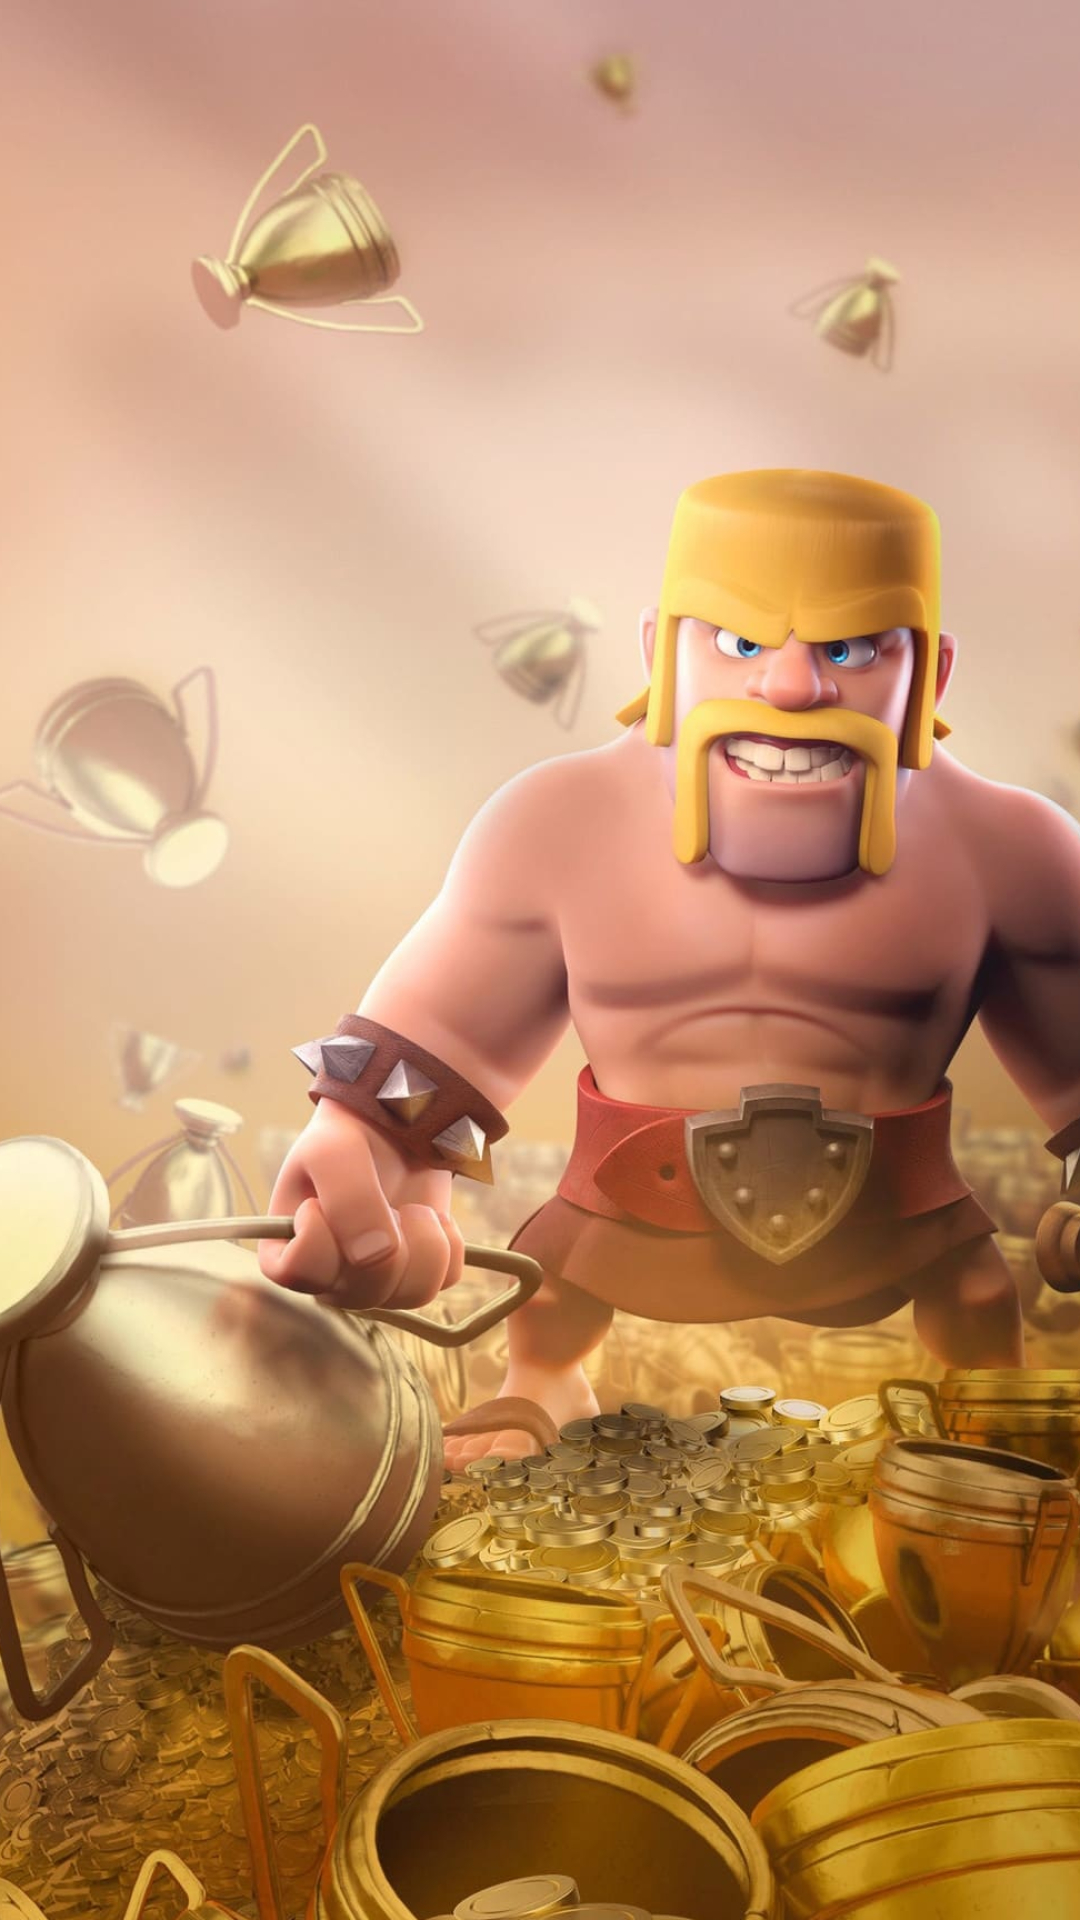 Clash of Clans: The Barbarian, One of many Regular Troops in the CoC game. 1080x1920 Full HD Wallpaper.